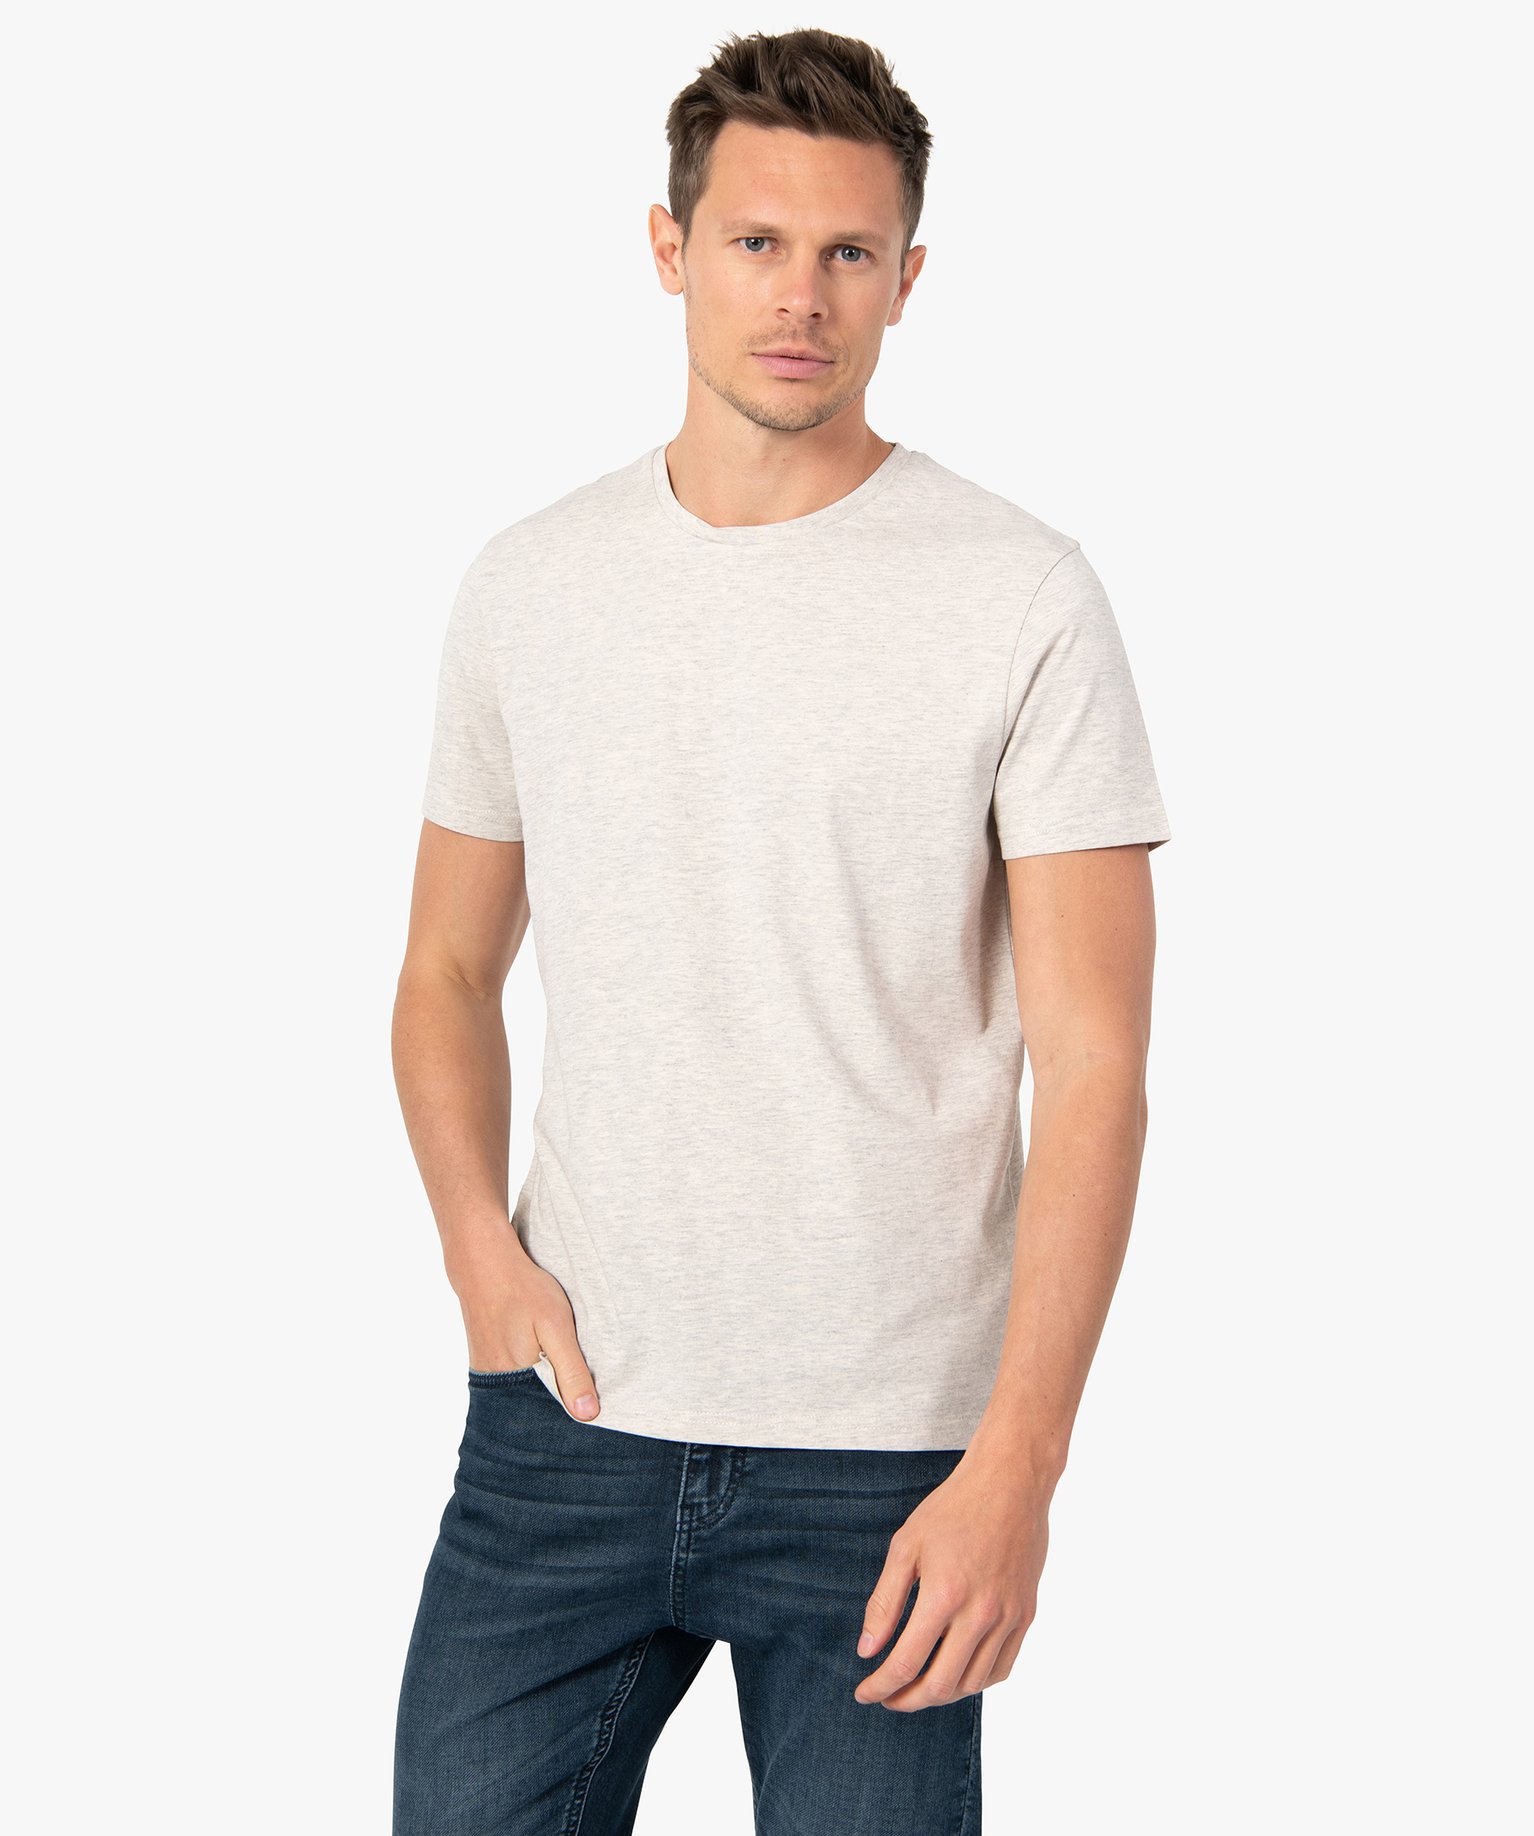 tee-shirt homme a manches courtes et col rond beige tee-shirts